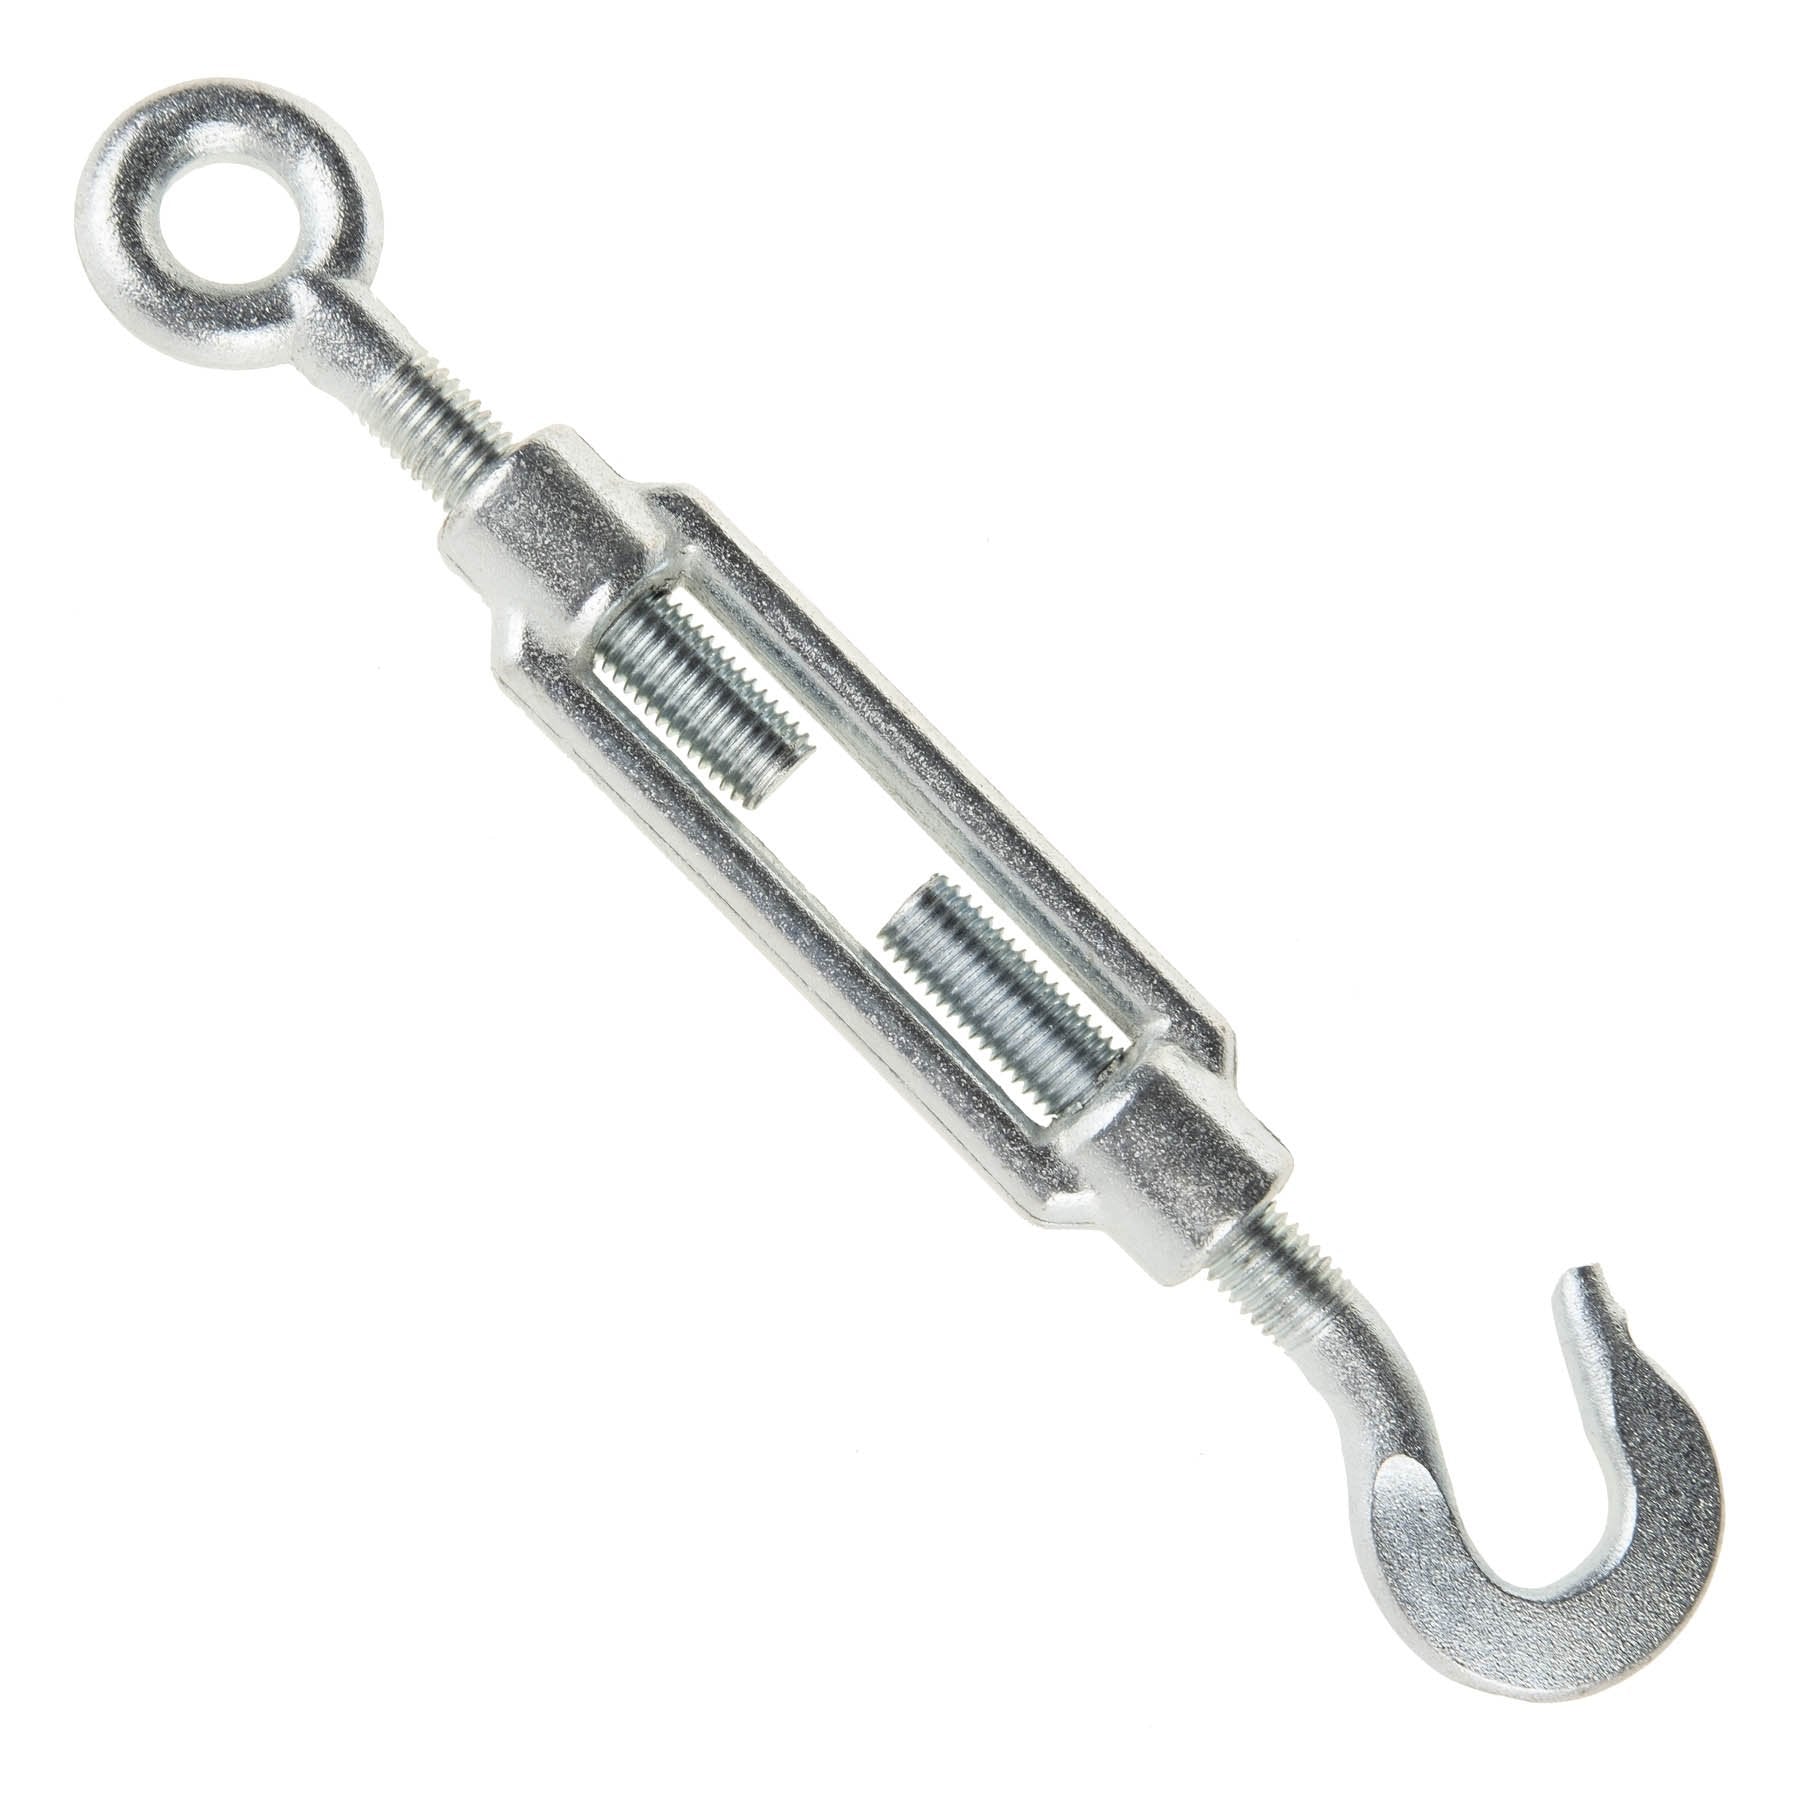 Turnbuckle for boxing ring ropes